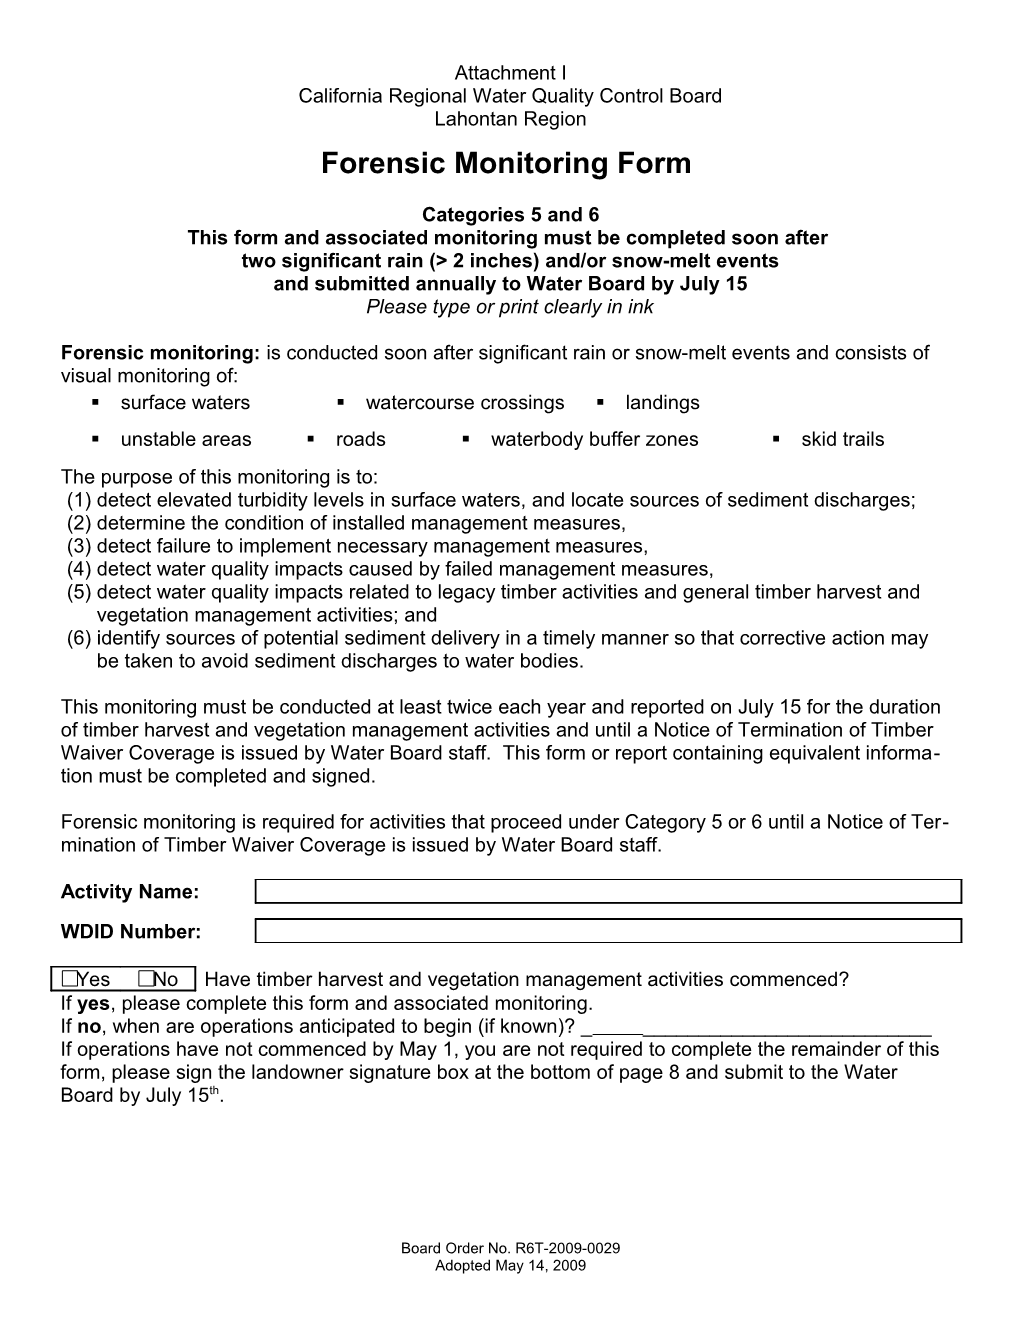 Timber Waiver Forensic Monitoring Form (Categories 5 & 6)Page 1 of 8